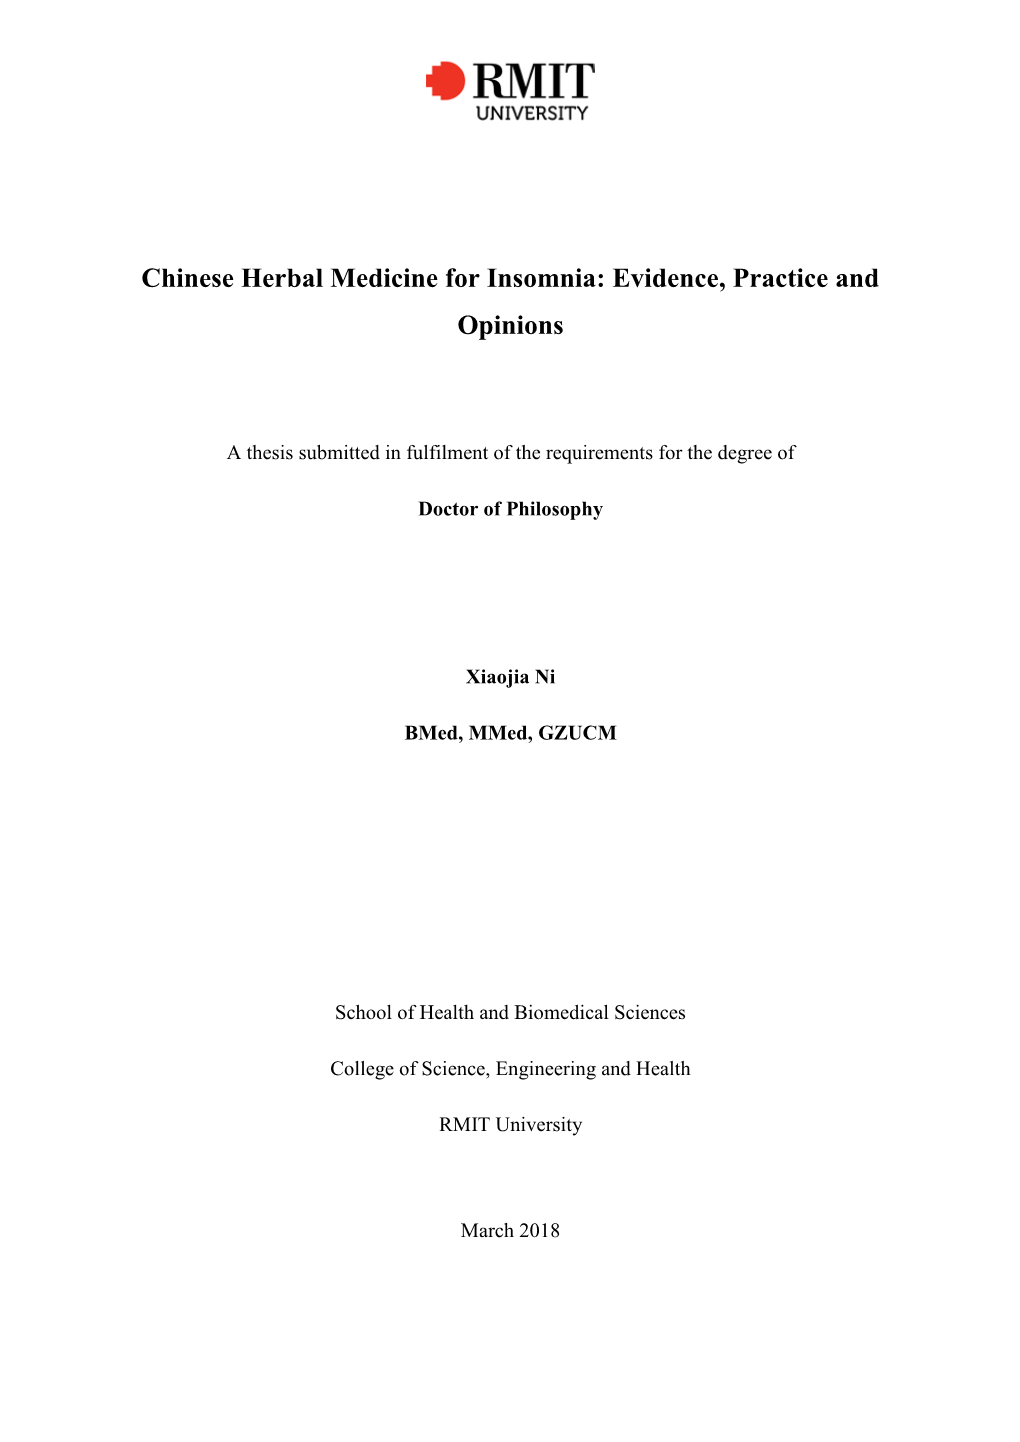 Chinese Herbal Medicine for Insomnia: Evidence, Practice and Opinions